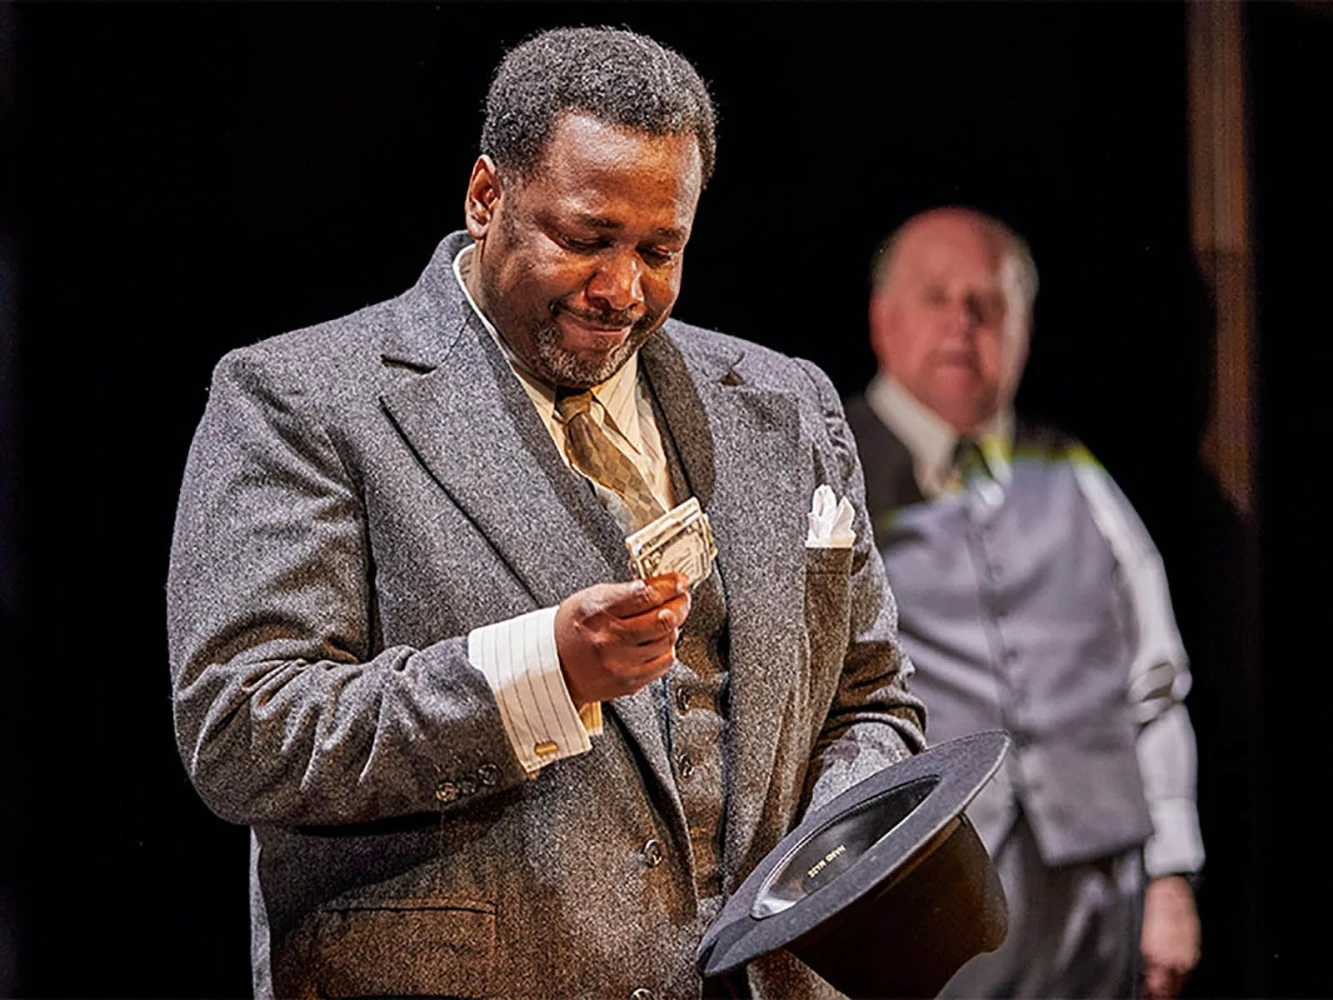 Death of a Salesman: What to expect - 1